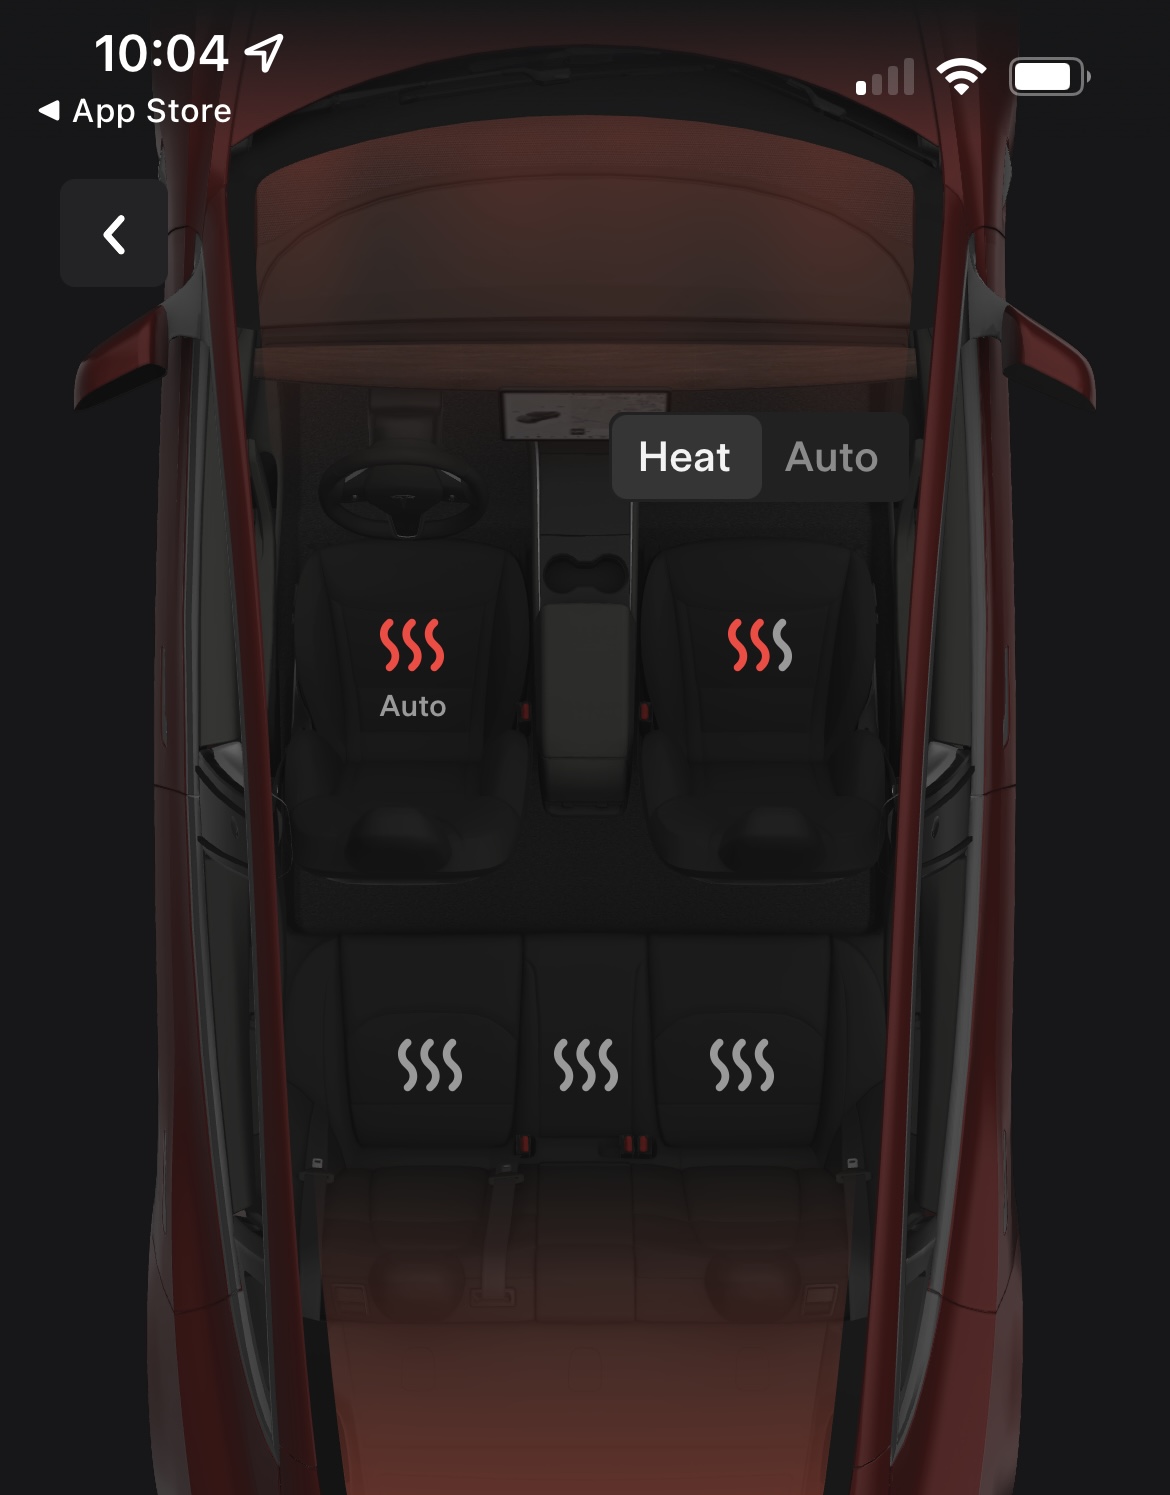 Set seat heaters to auto from the app